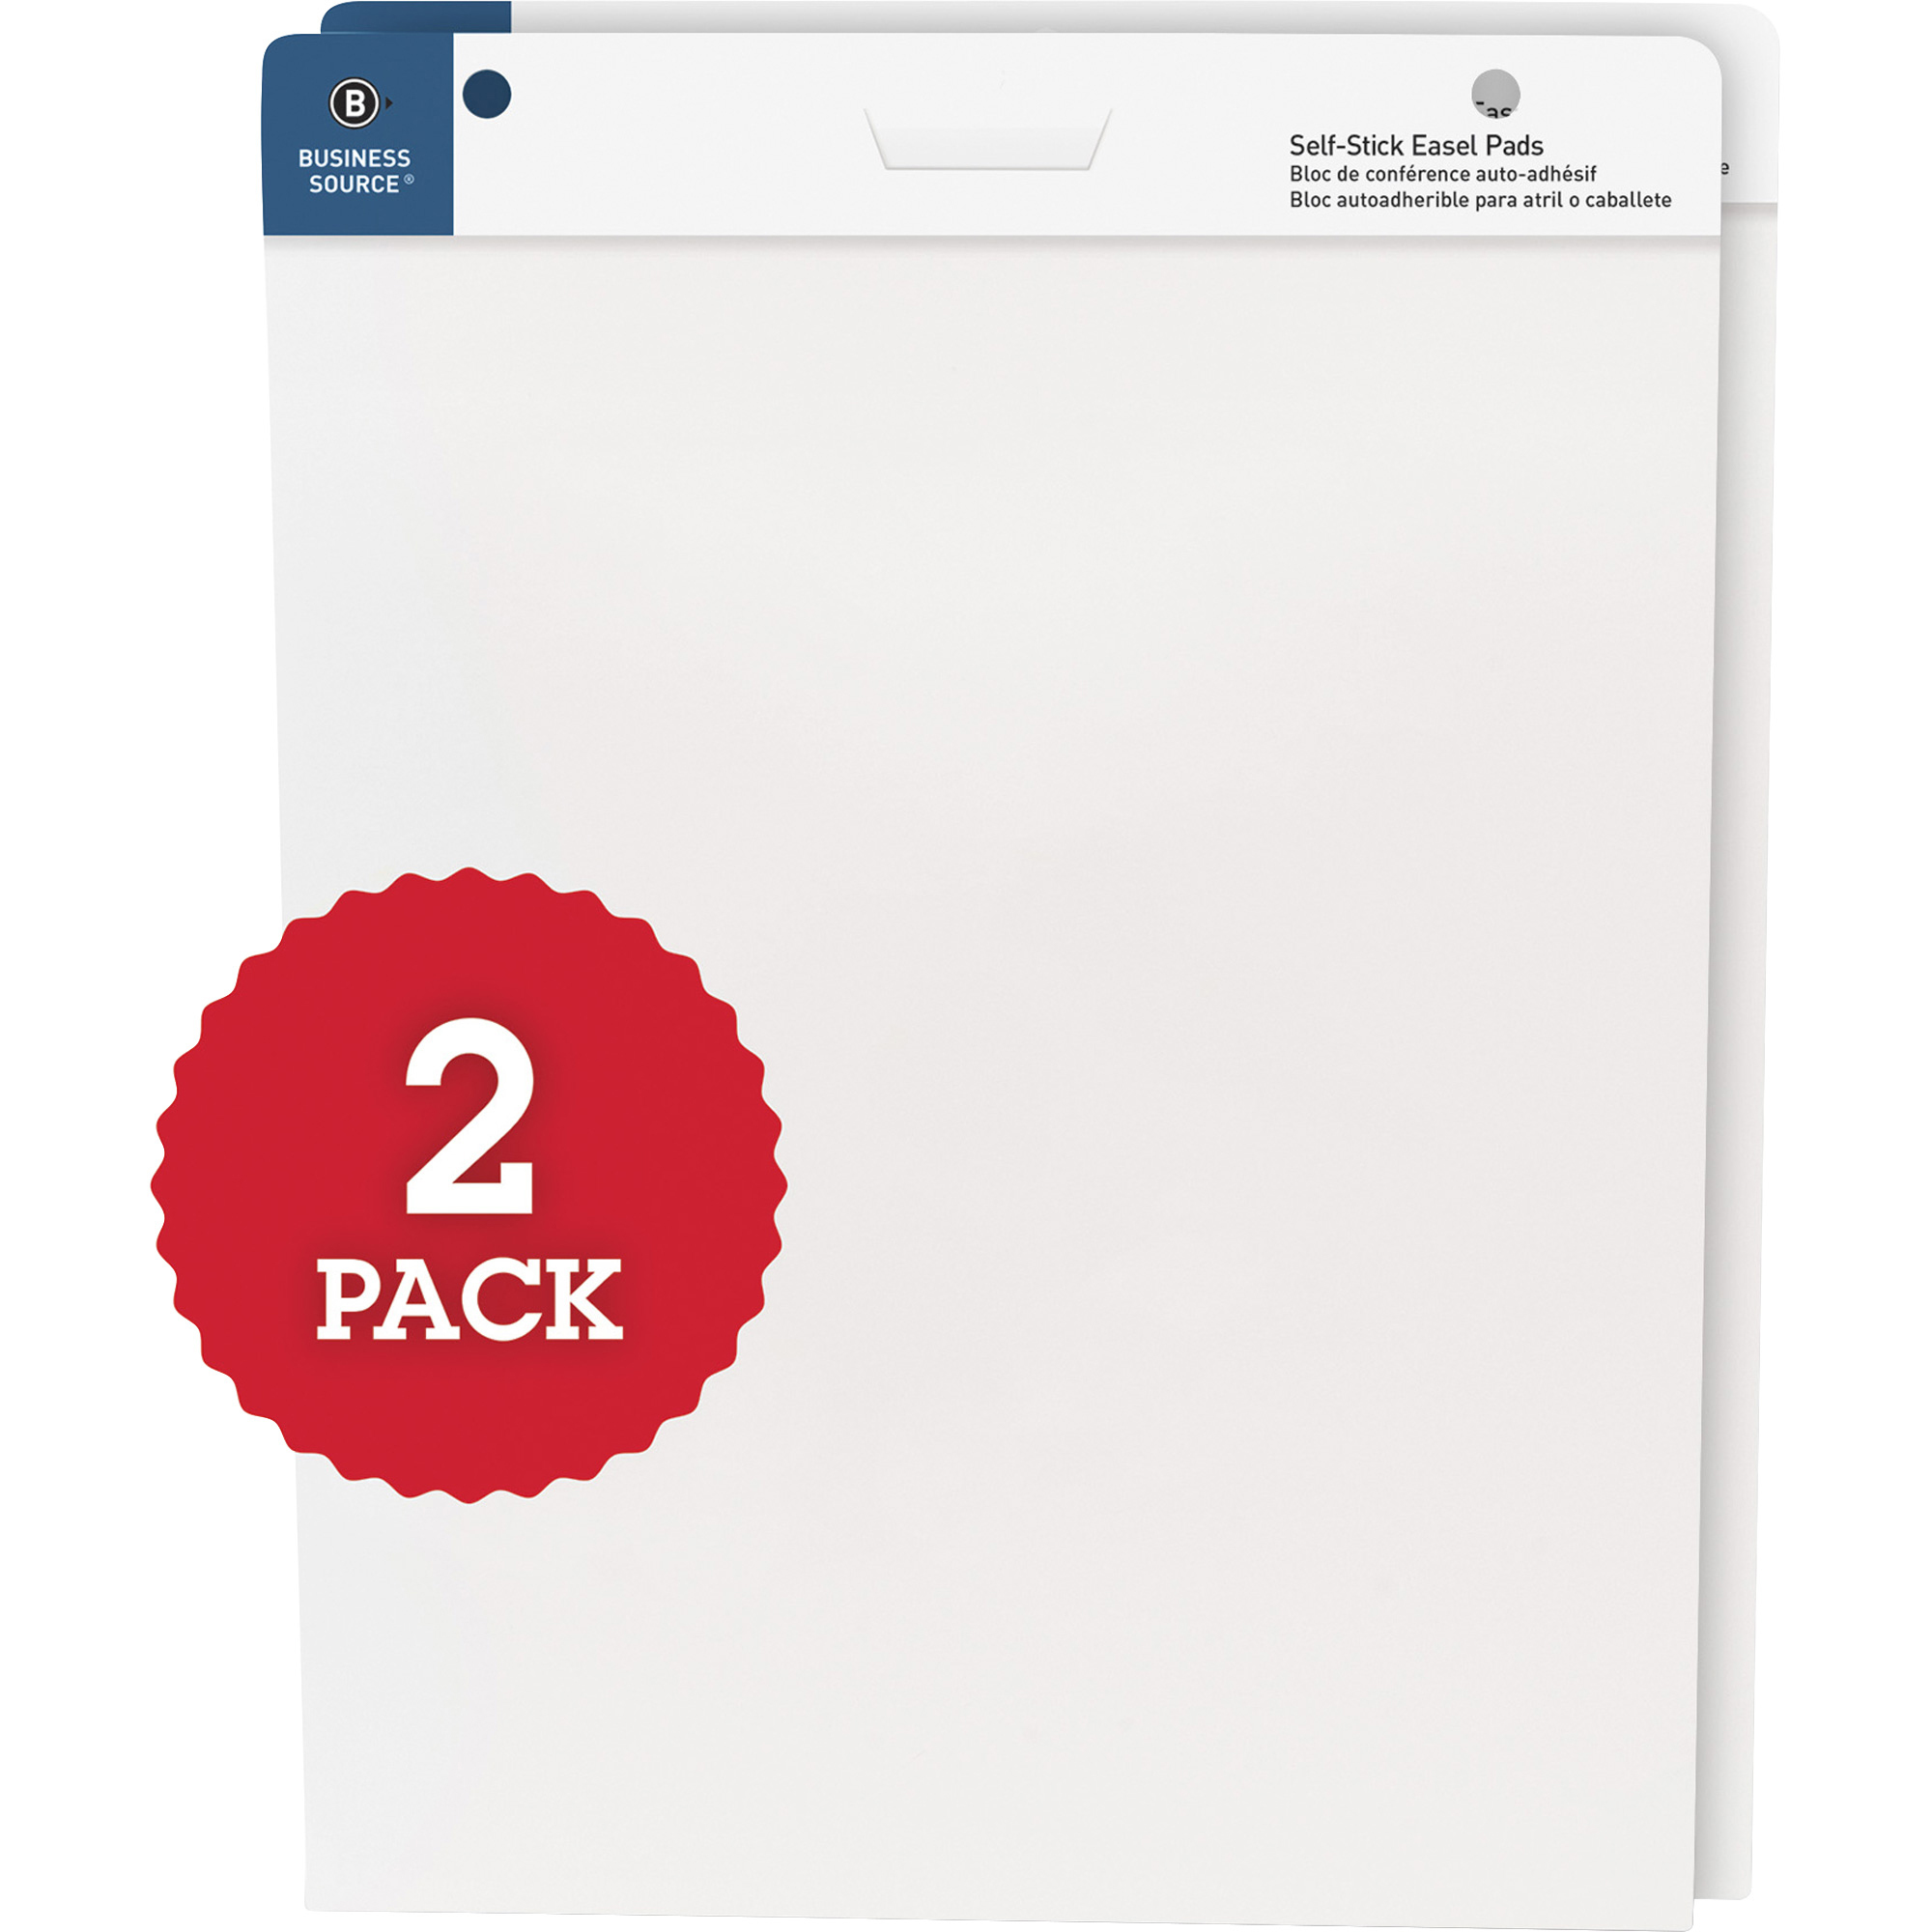 Easel Pads/ Flip Charts, Unruled, 27 x 34, White, 50 Sheets, 2/ Carton - Easel  Pads